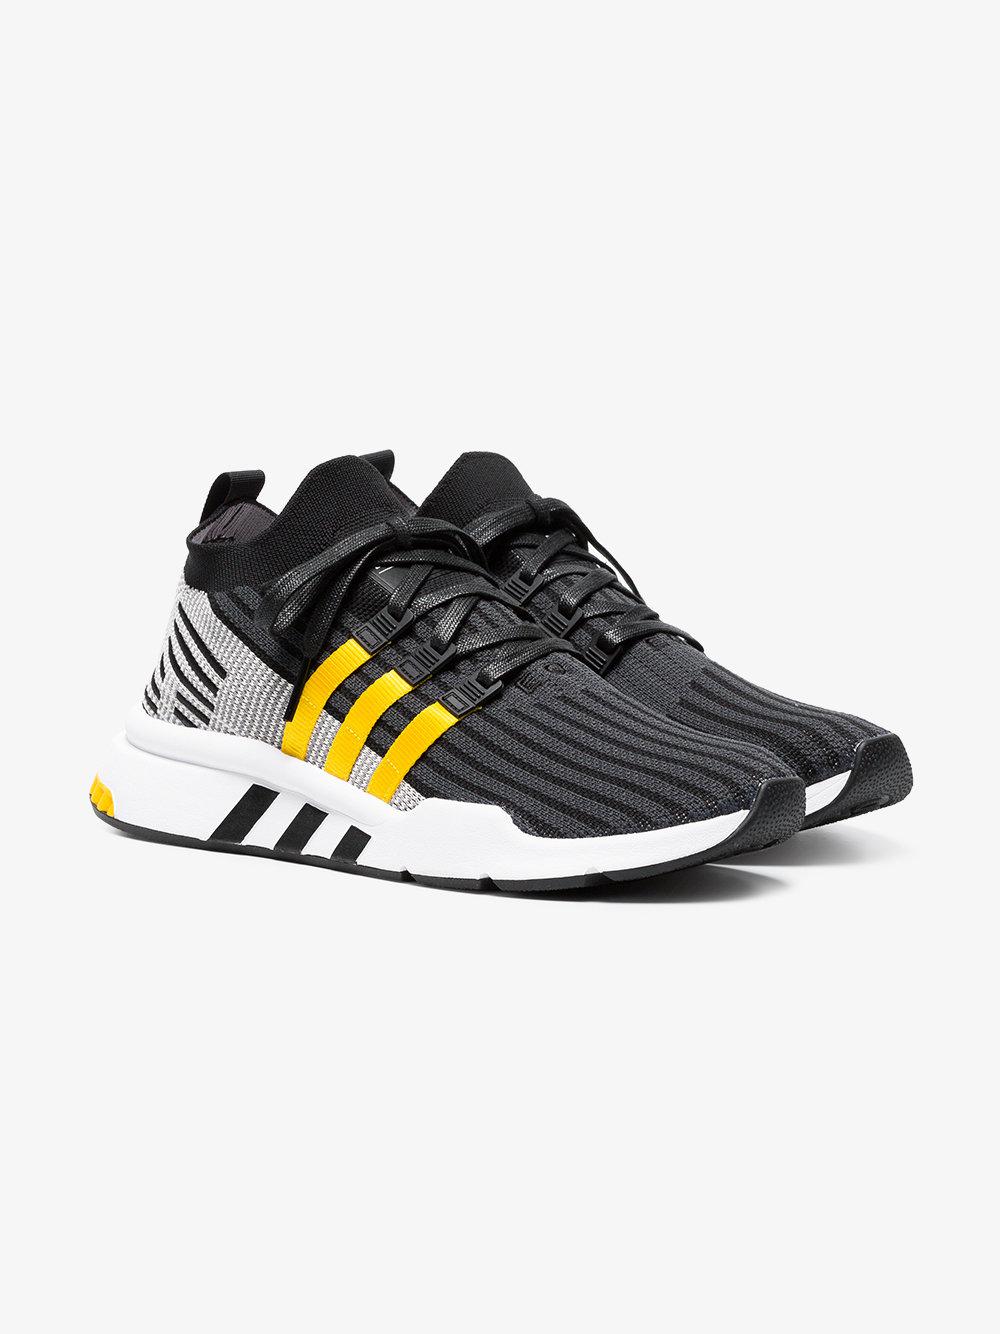 adidas Black And Yellow Eqt Support Mid Adv Primeknit Sneakers for Men -  Lyst